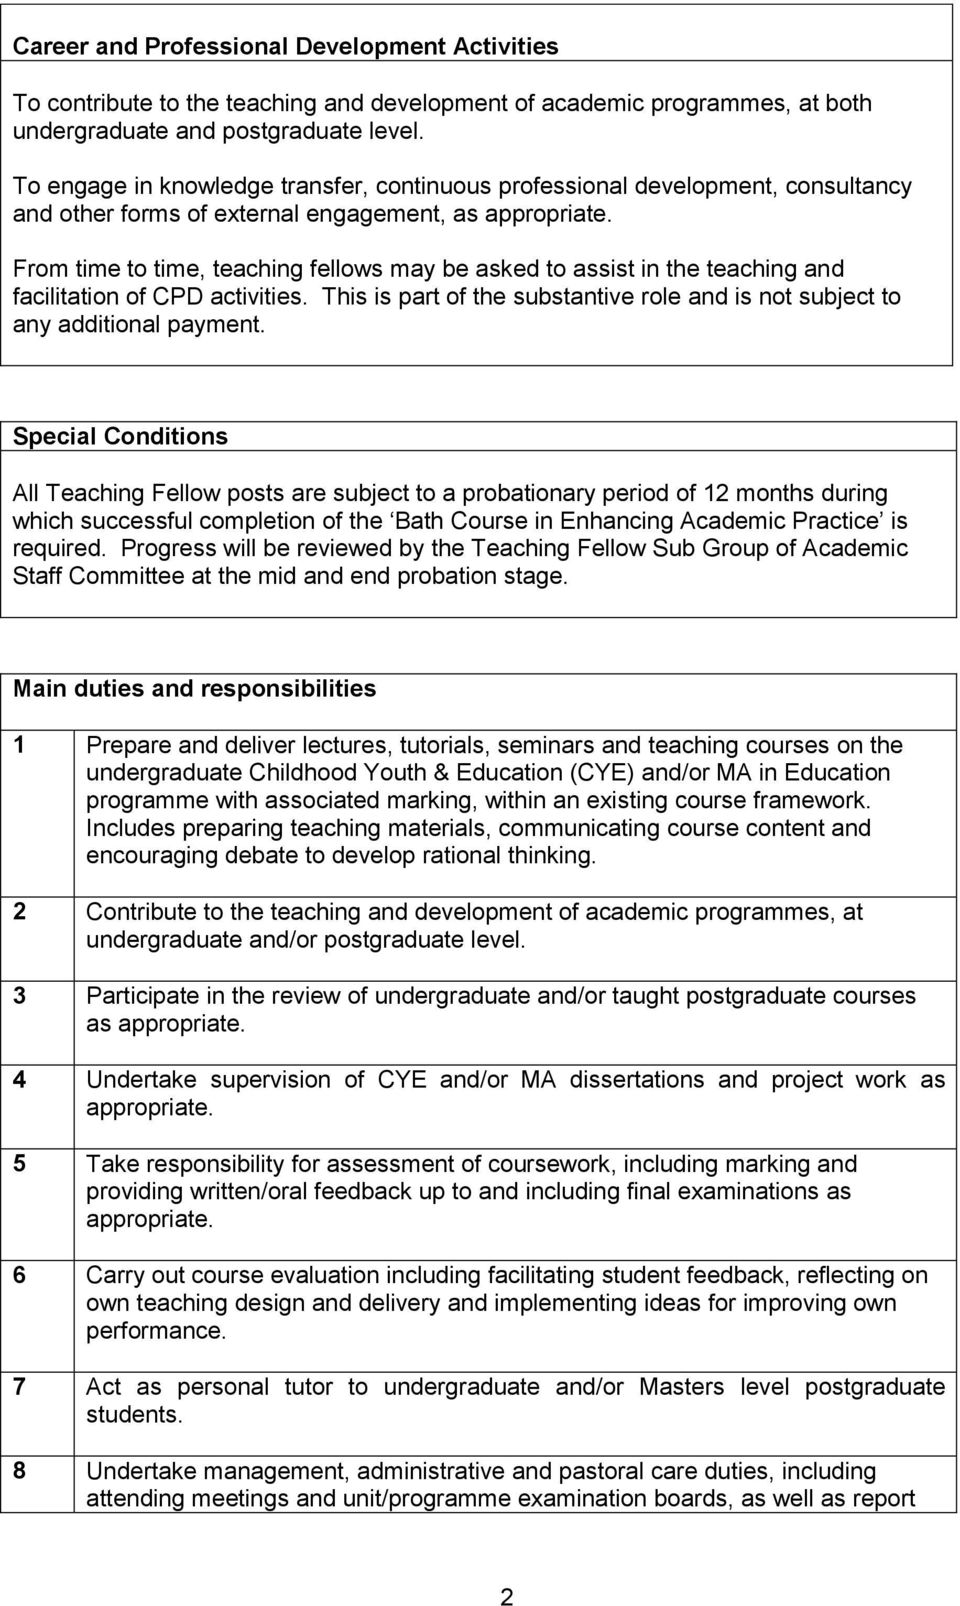 From time to time, teaching fellows may be asked to assist in the teaching and facilitation of CPD activities. This is part of the substantive role and is not subject to any additional payment.